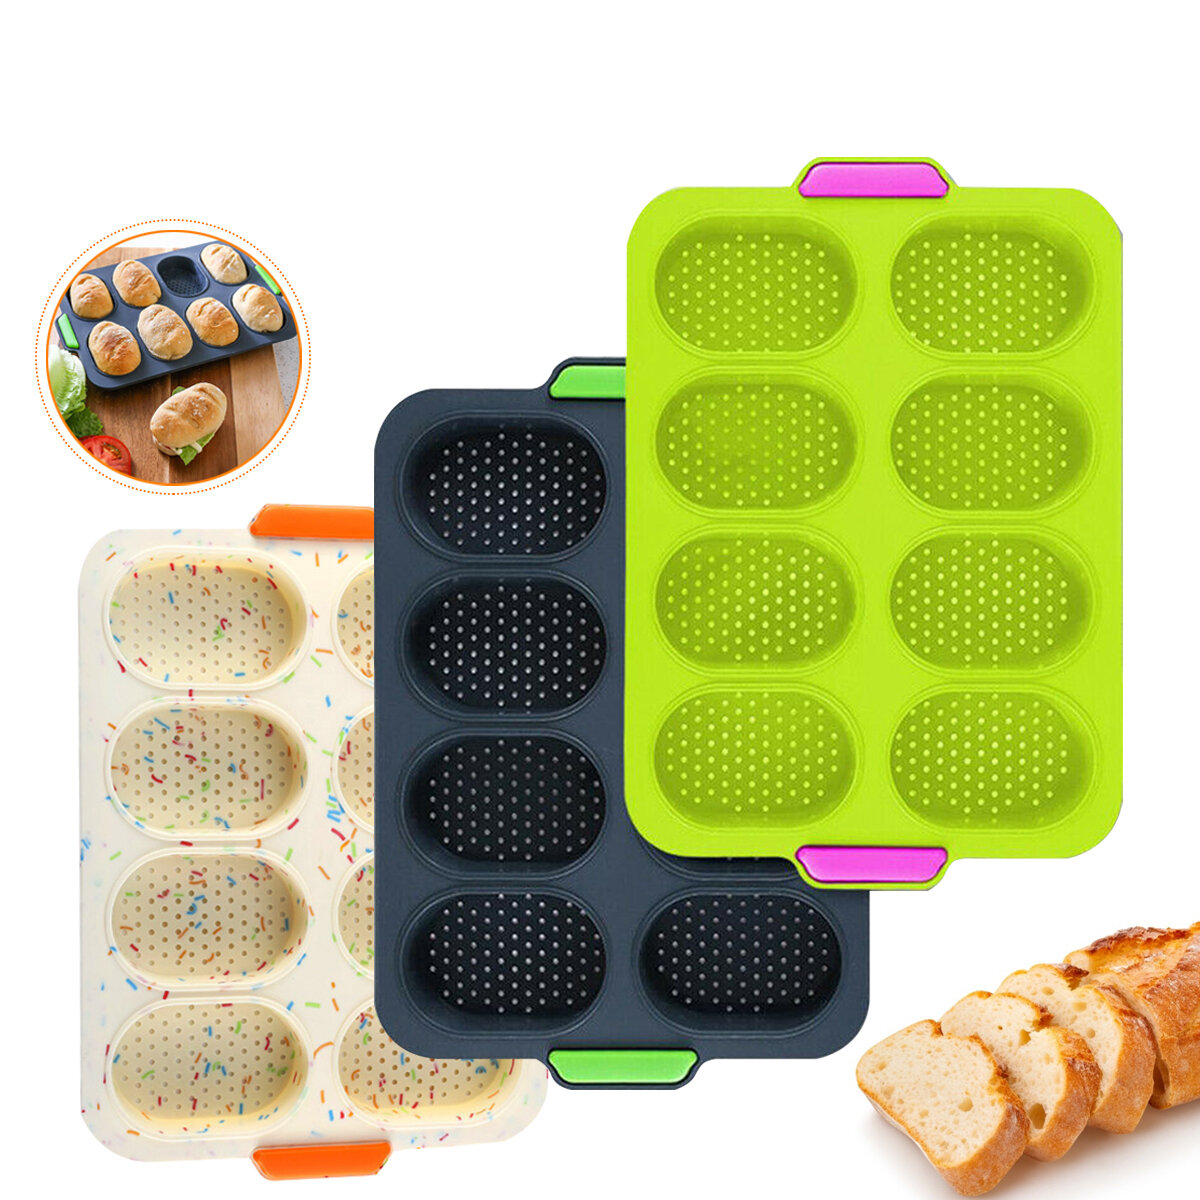 

8 Cup Holes Non-Stick Cupcake Baking Pan Silicone Mold 3D French Bread DIY Kitchen Supplies